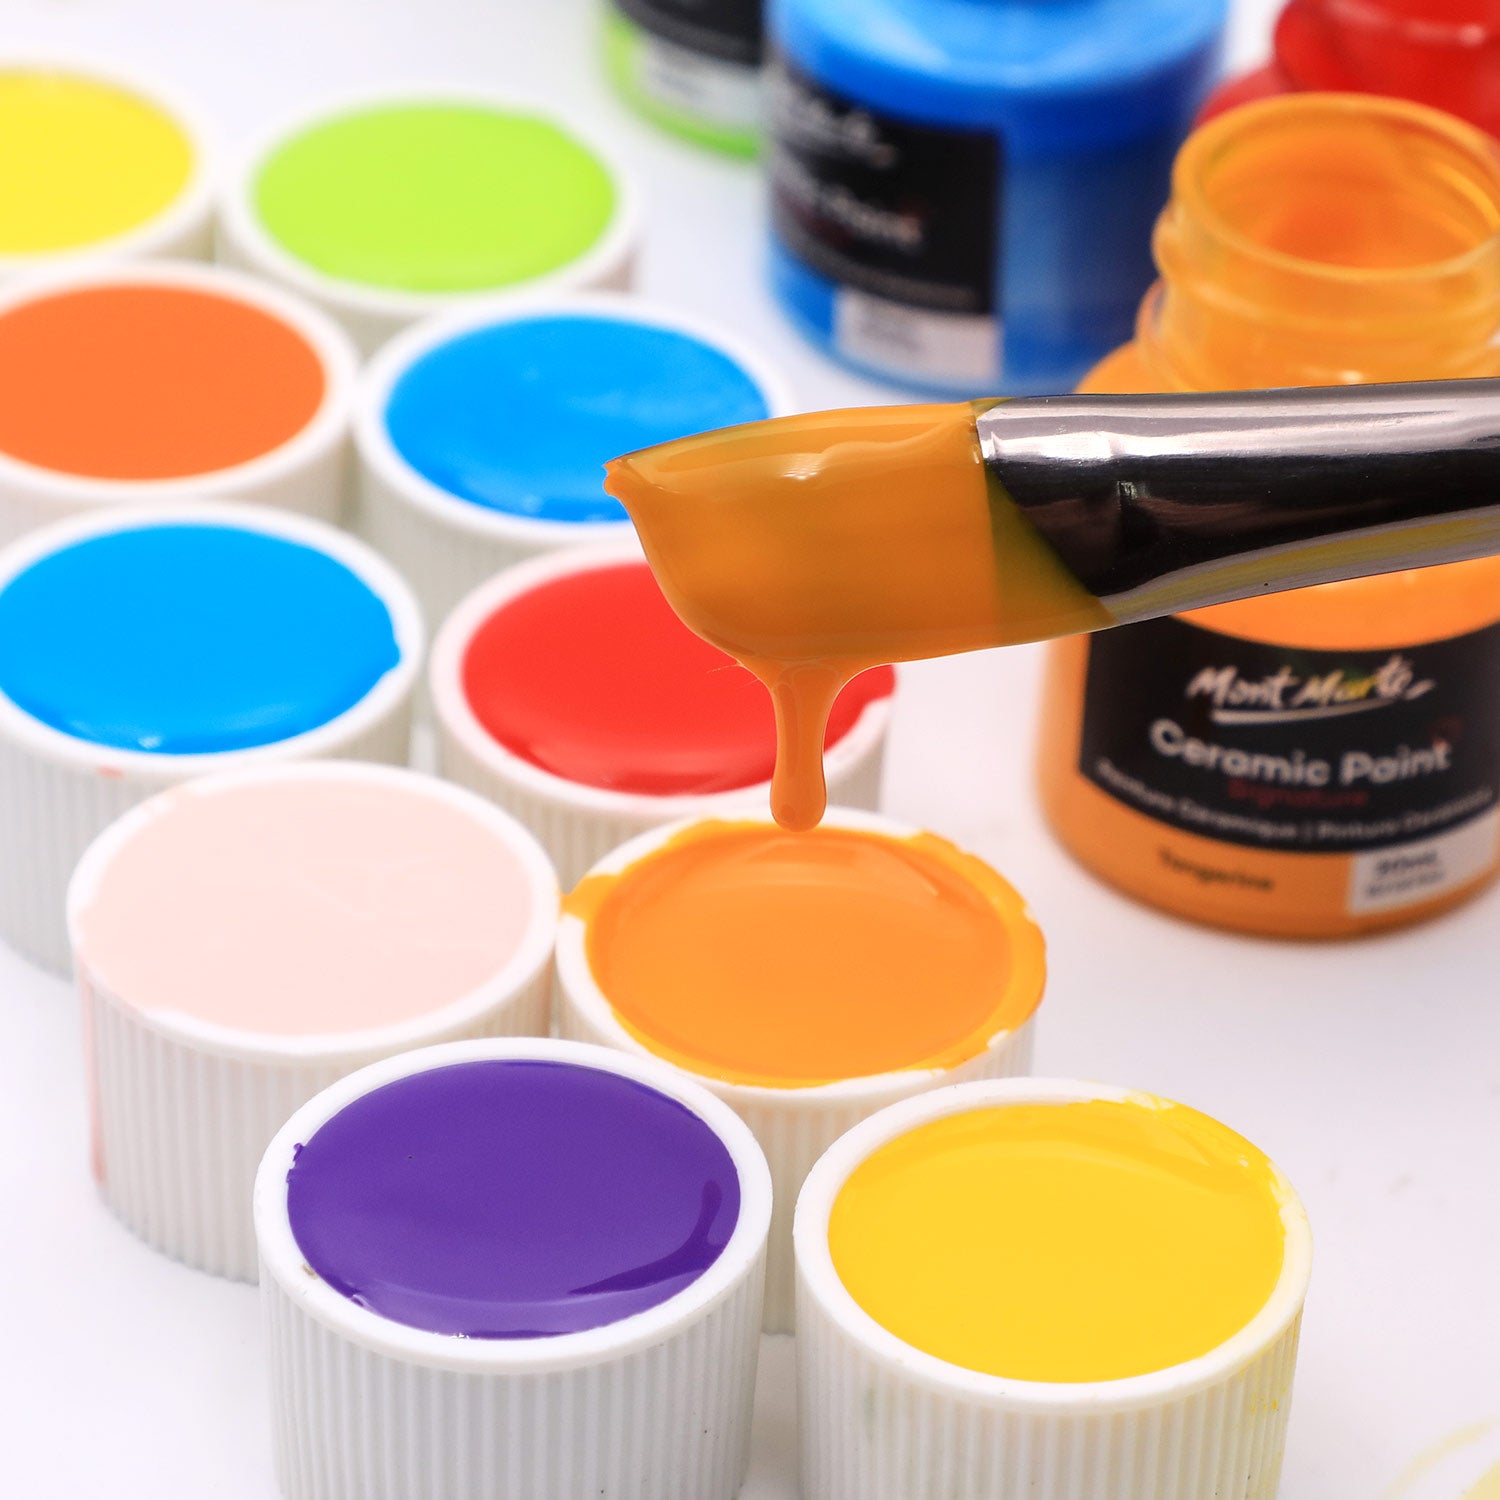 3. Mont Marte Ceramic Paints poured into their caps, with a paintbrush dipped into the orange paint and dripping